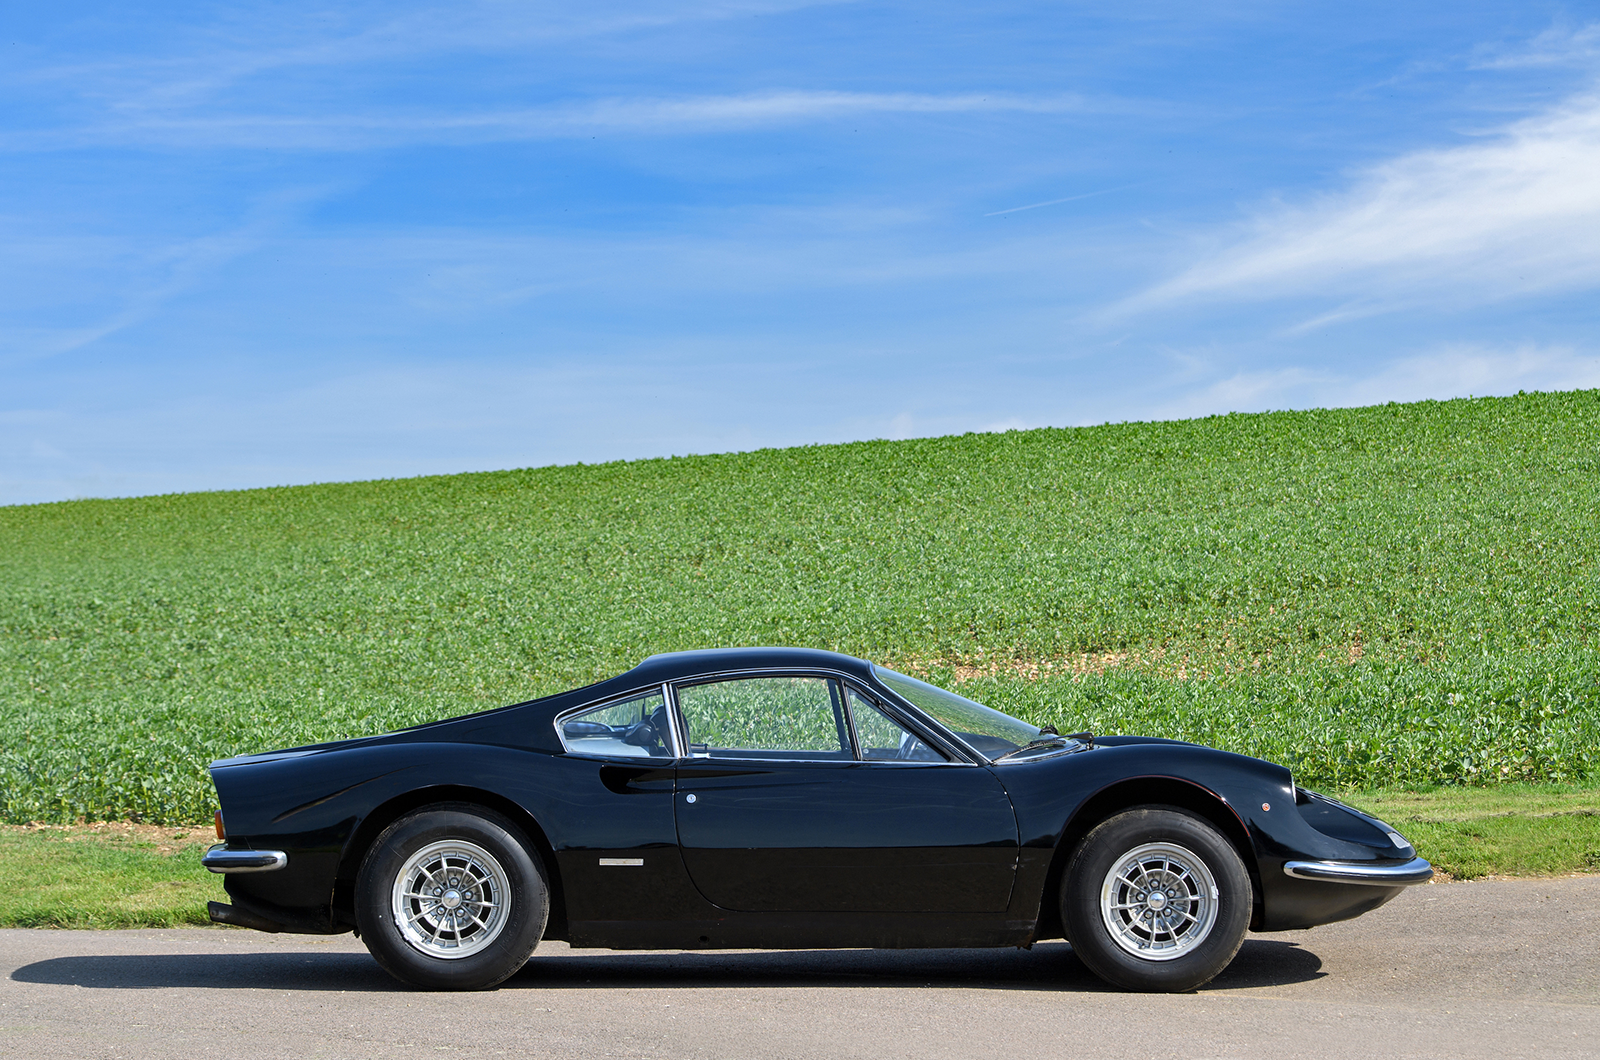 Classic & Sports Car – Dino celebration coming to London Concours